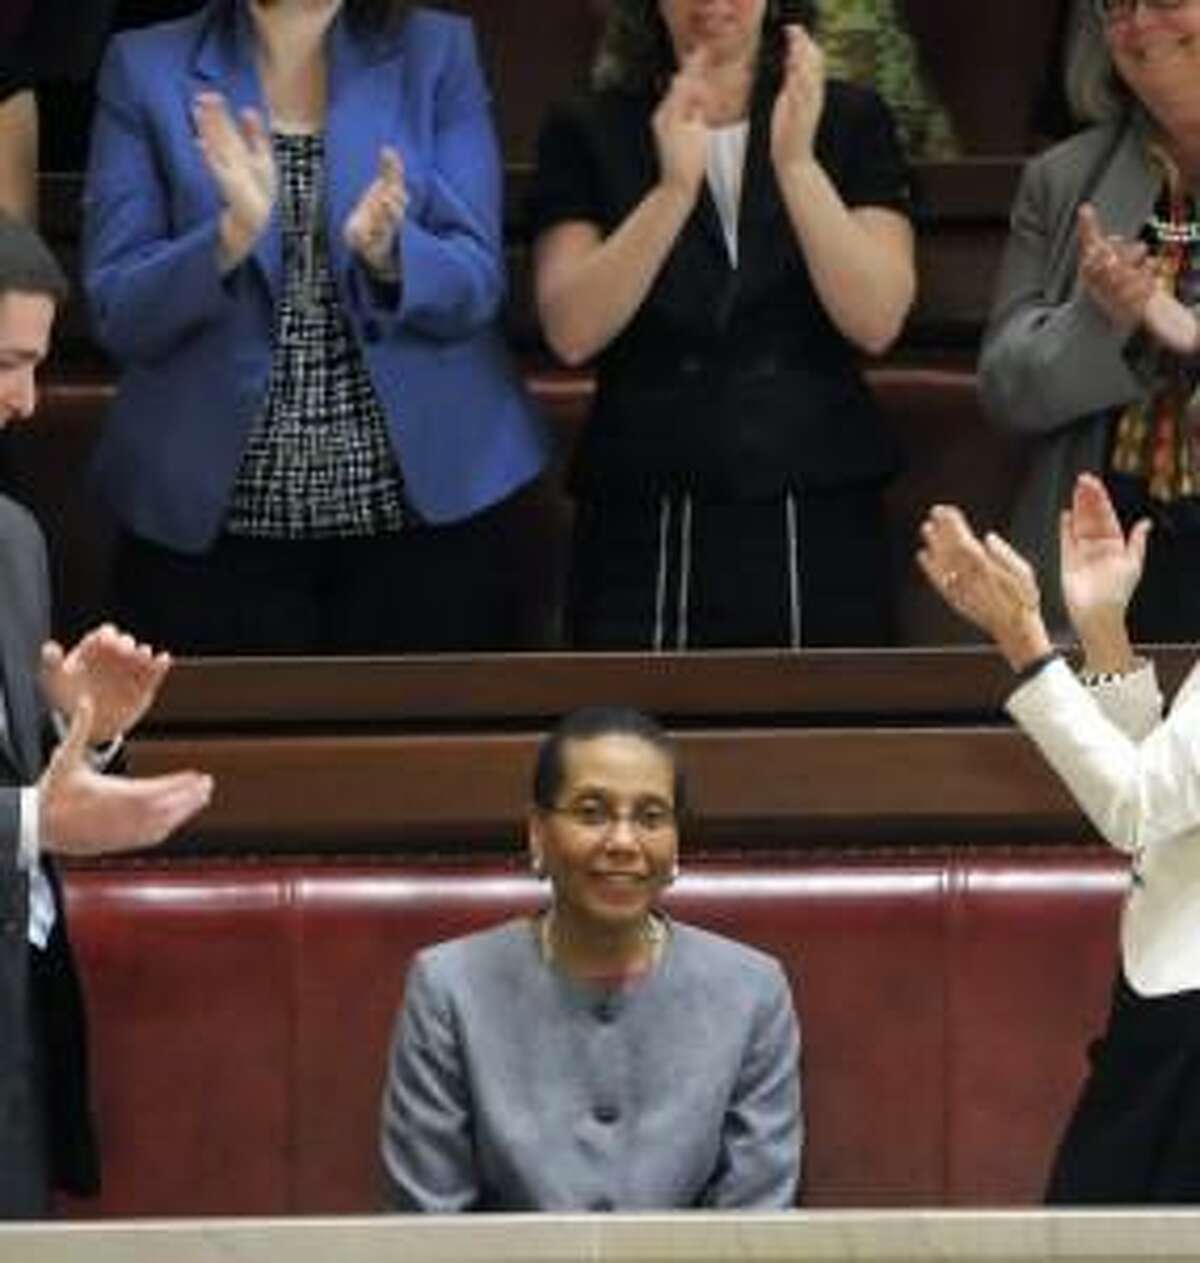 Sheila Abdus Salaam in June 2013, as the state Senate confirmed her nomination to the Court of Appeals. (Paul Buckowski, Times Union)